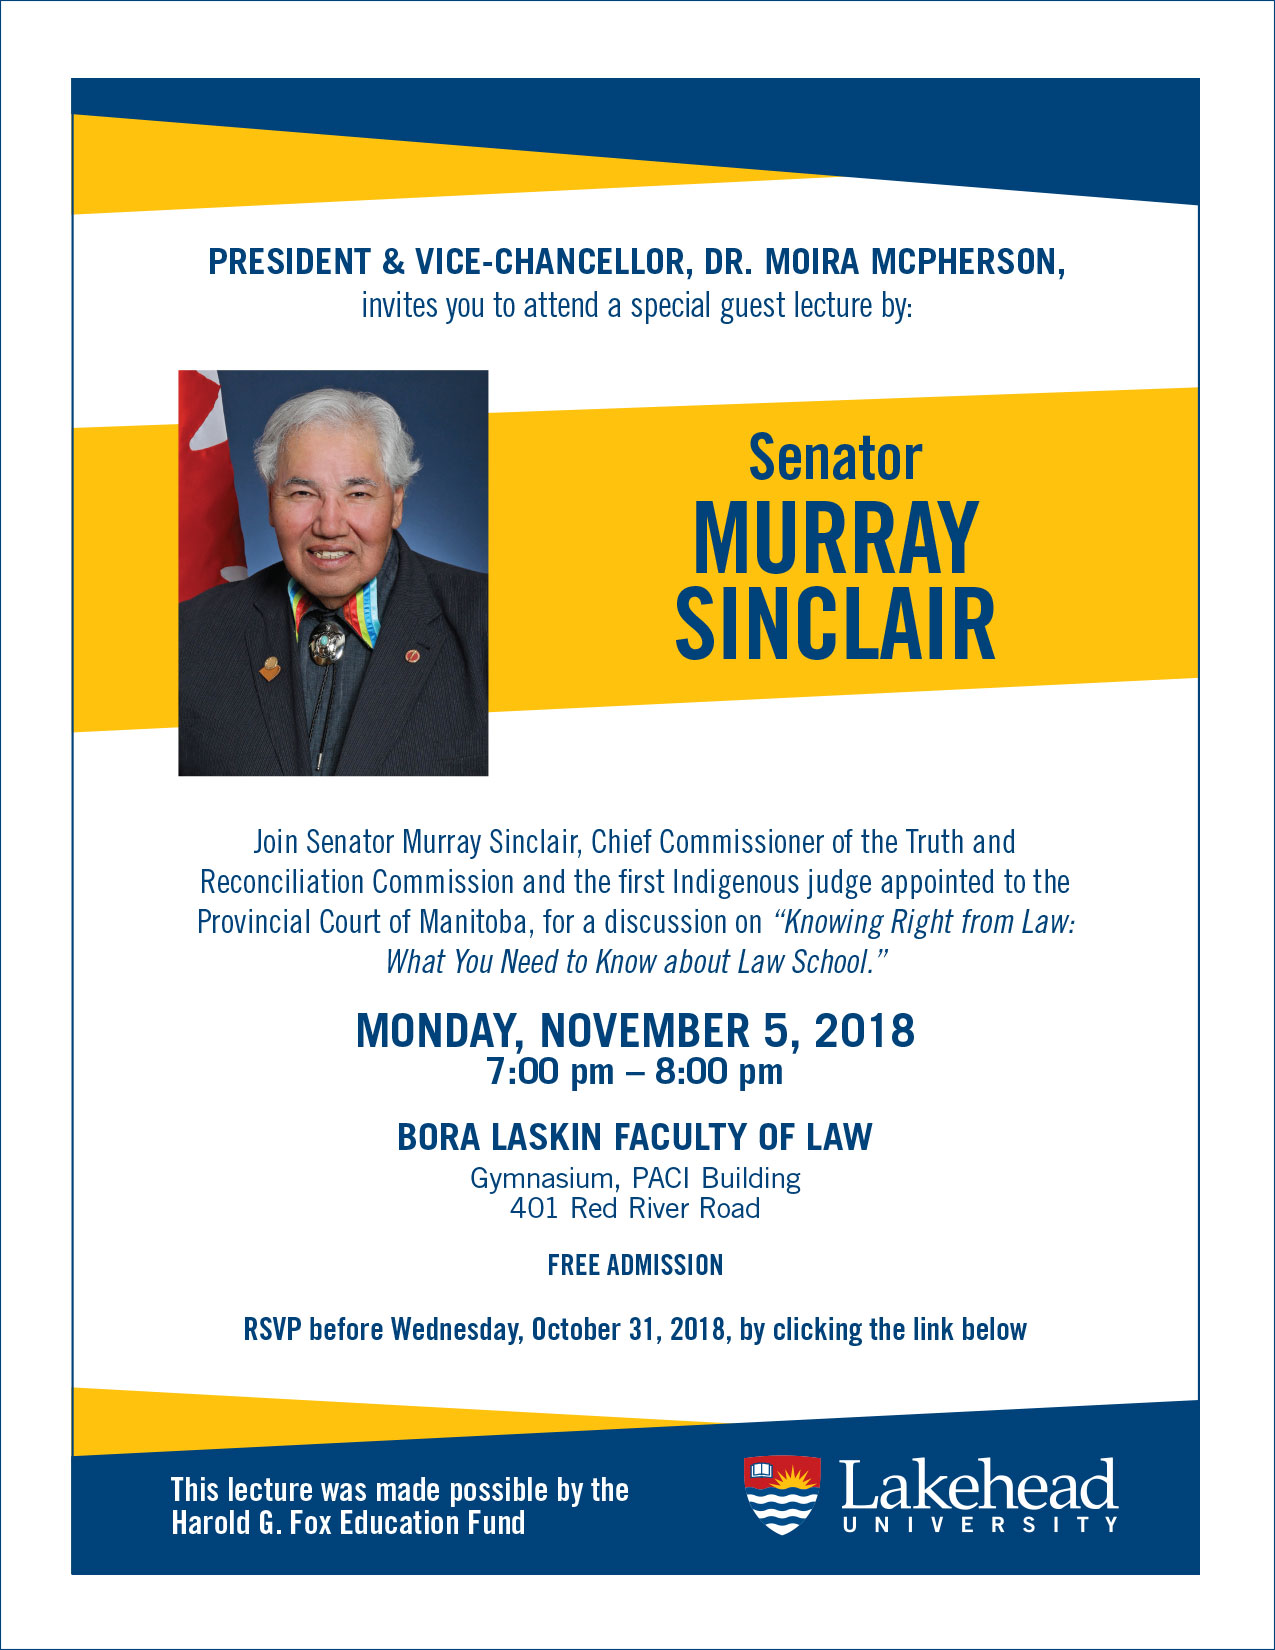 Poster for the upcoming lecture event featuring Murray Sinclair.